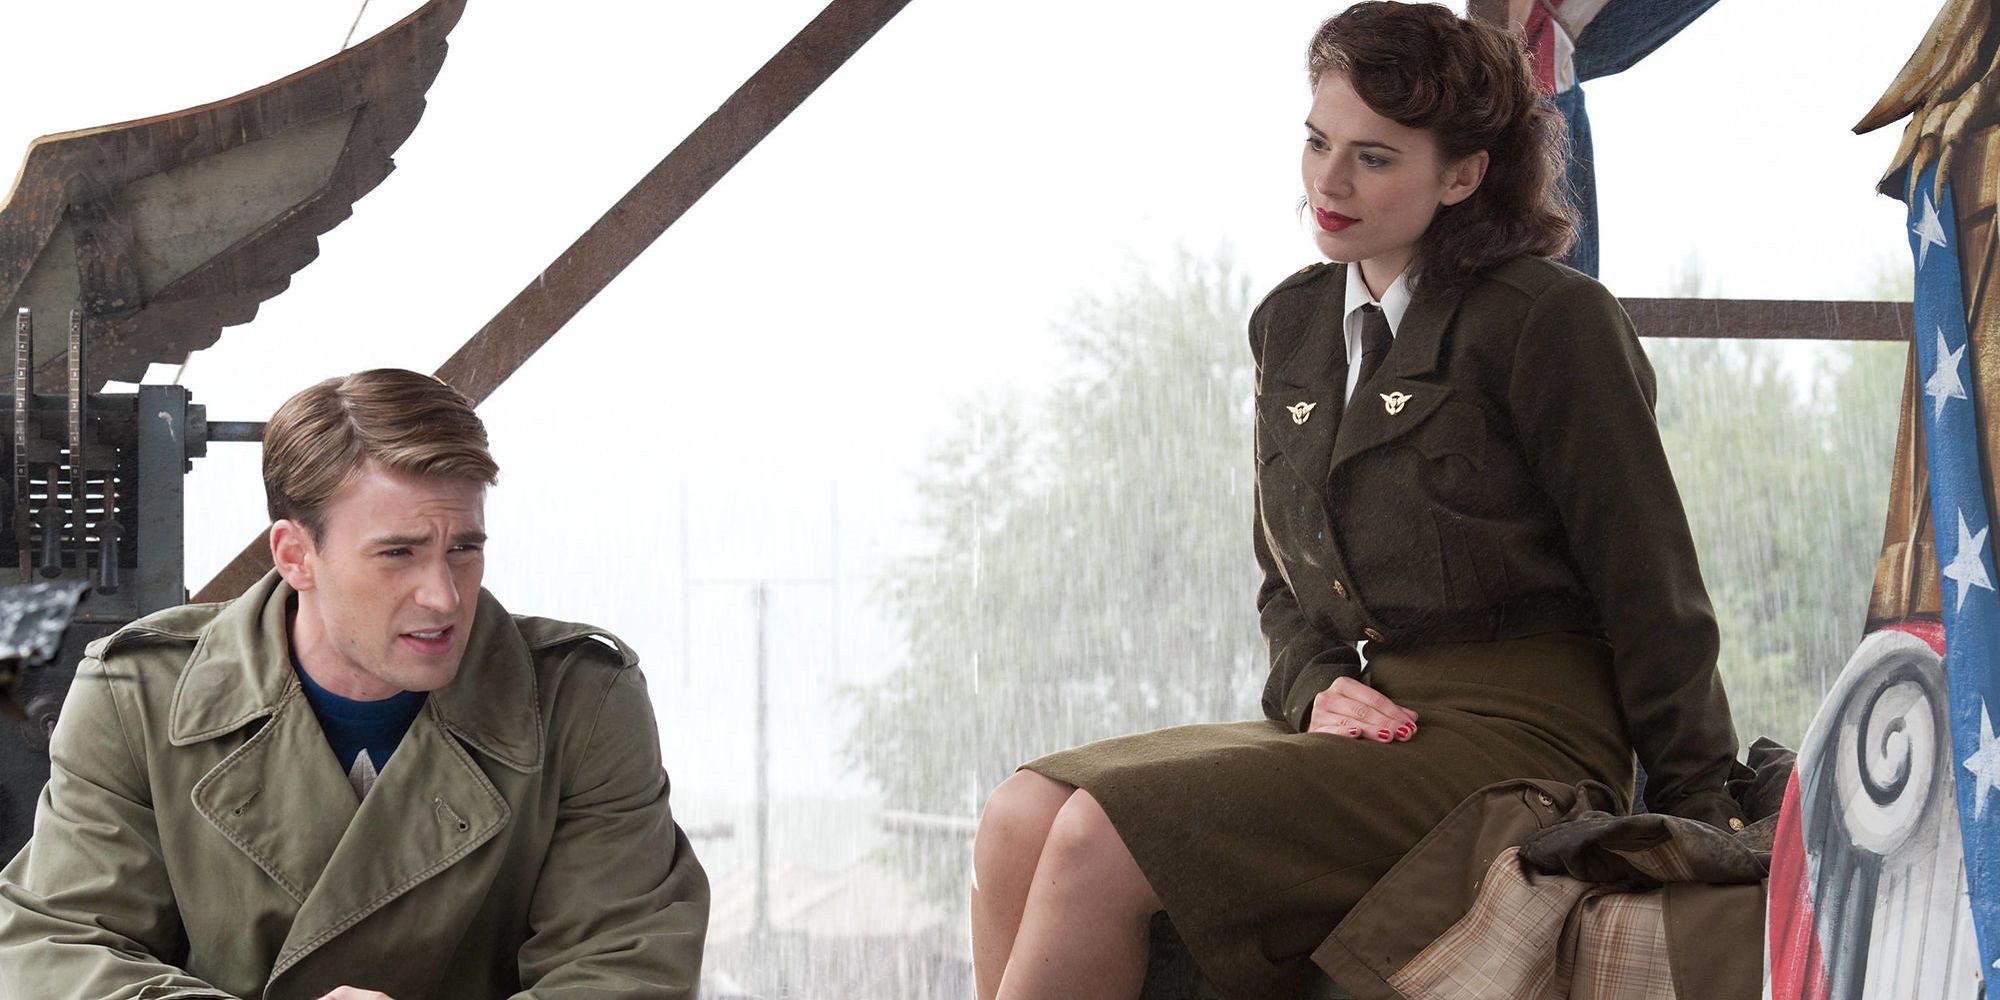 Chris Evans and Hayley Atwell in Captain America The First Avenger